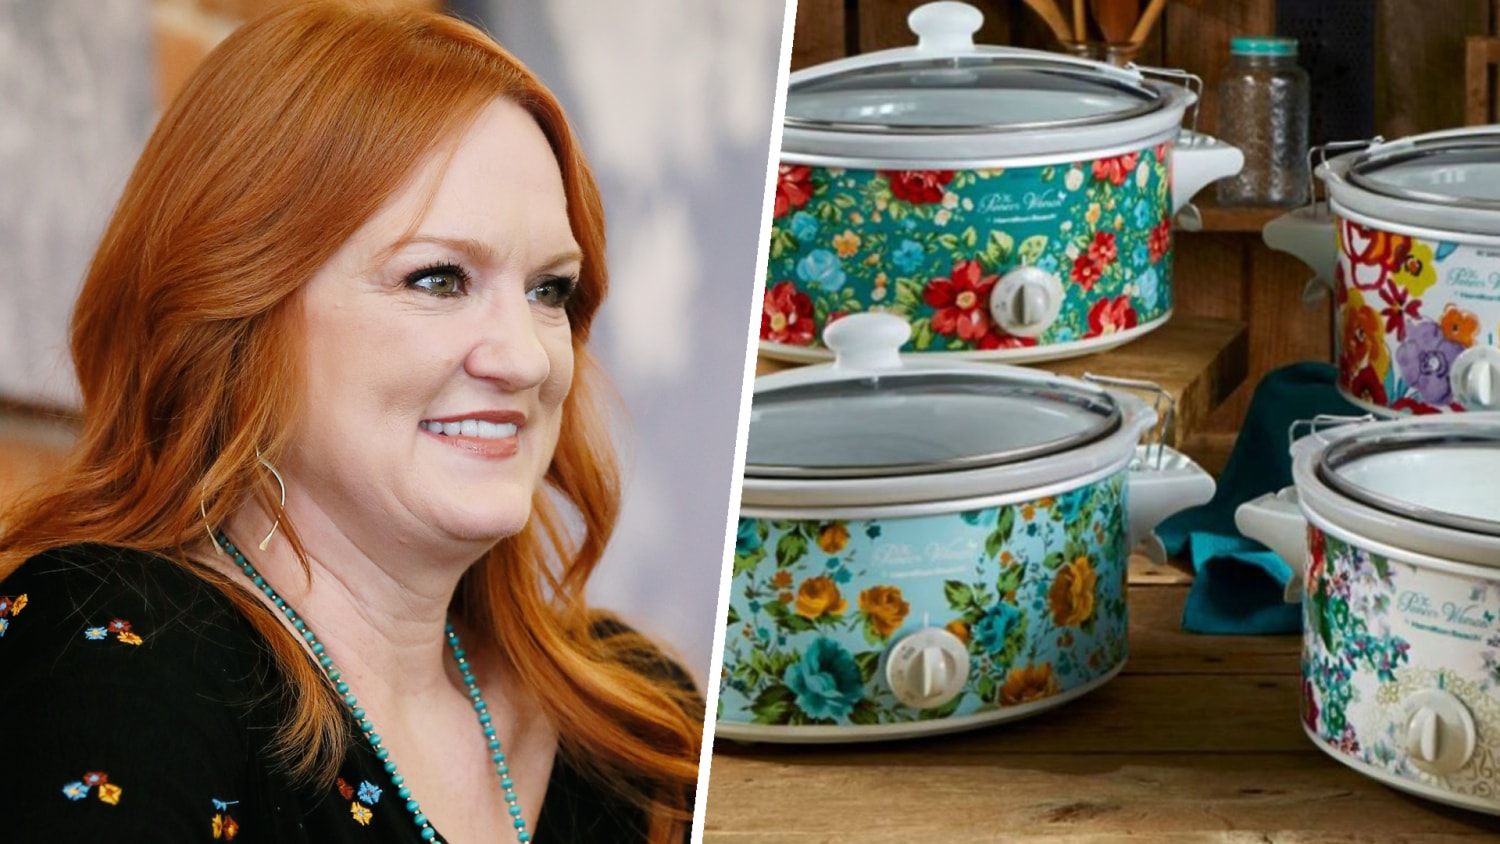 https://media-cldnry.s-nbcnews.com/image/upload/t_fit-1500w,f_auto,q_auto:best/newscms/2017_38/1283837/ree-drummond-slow-cookers-today-170921-tease.jpg